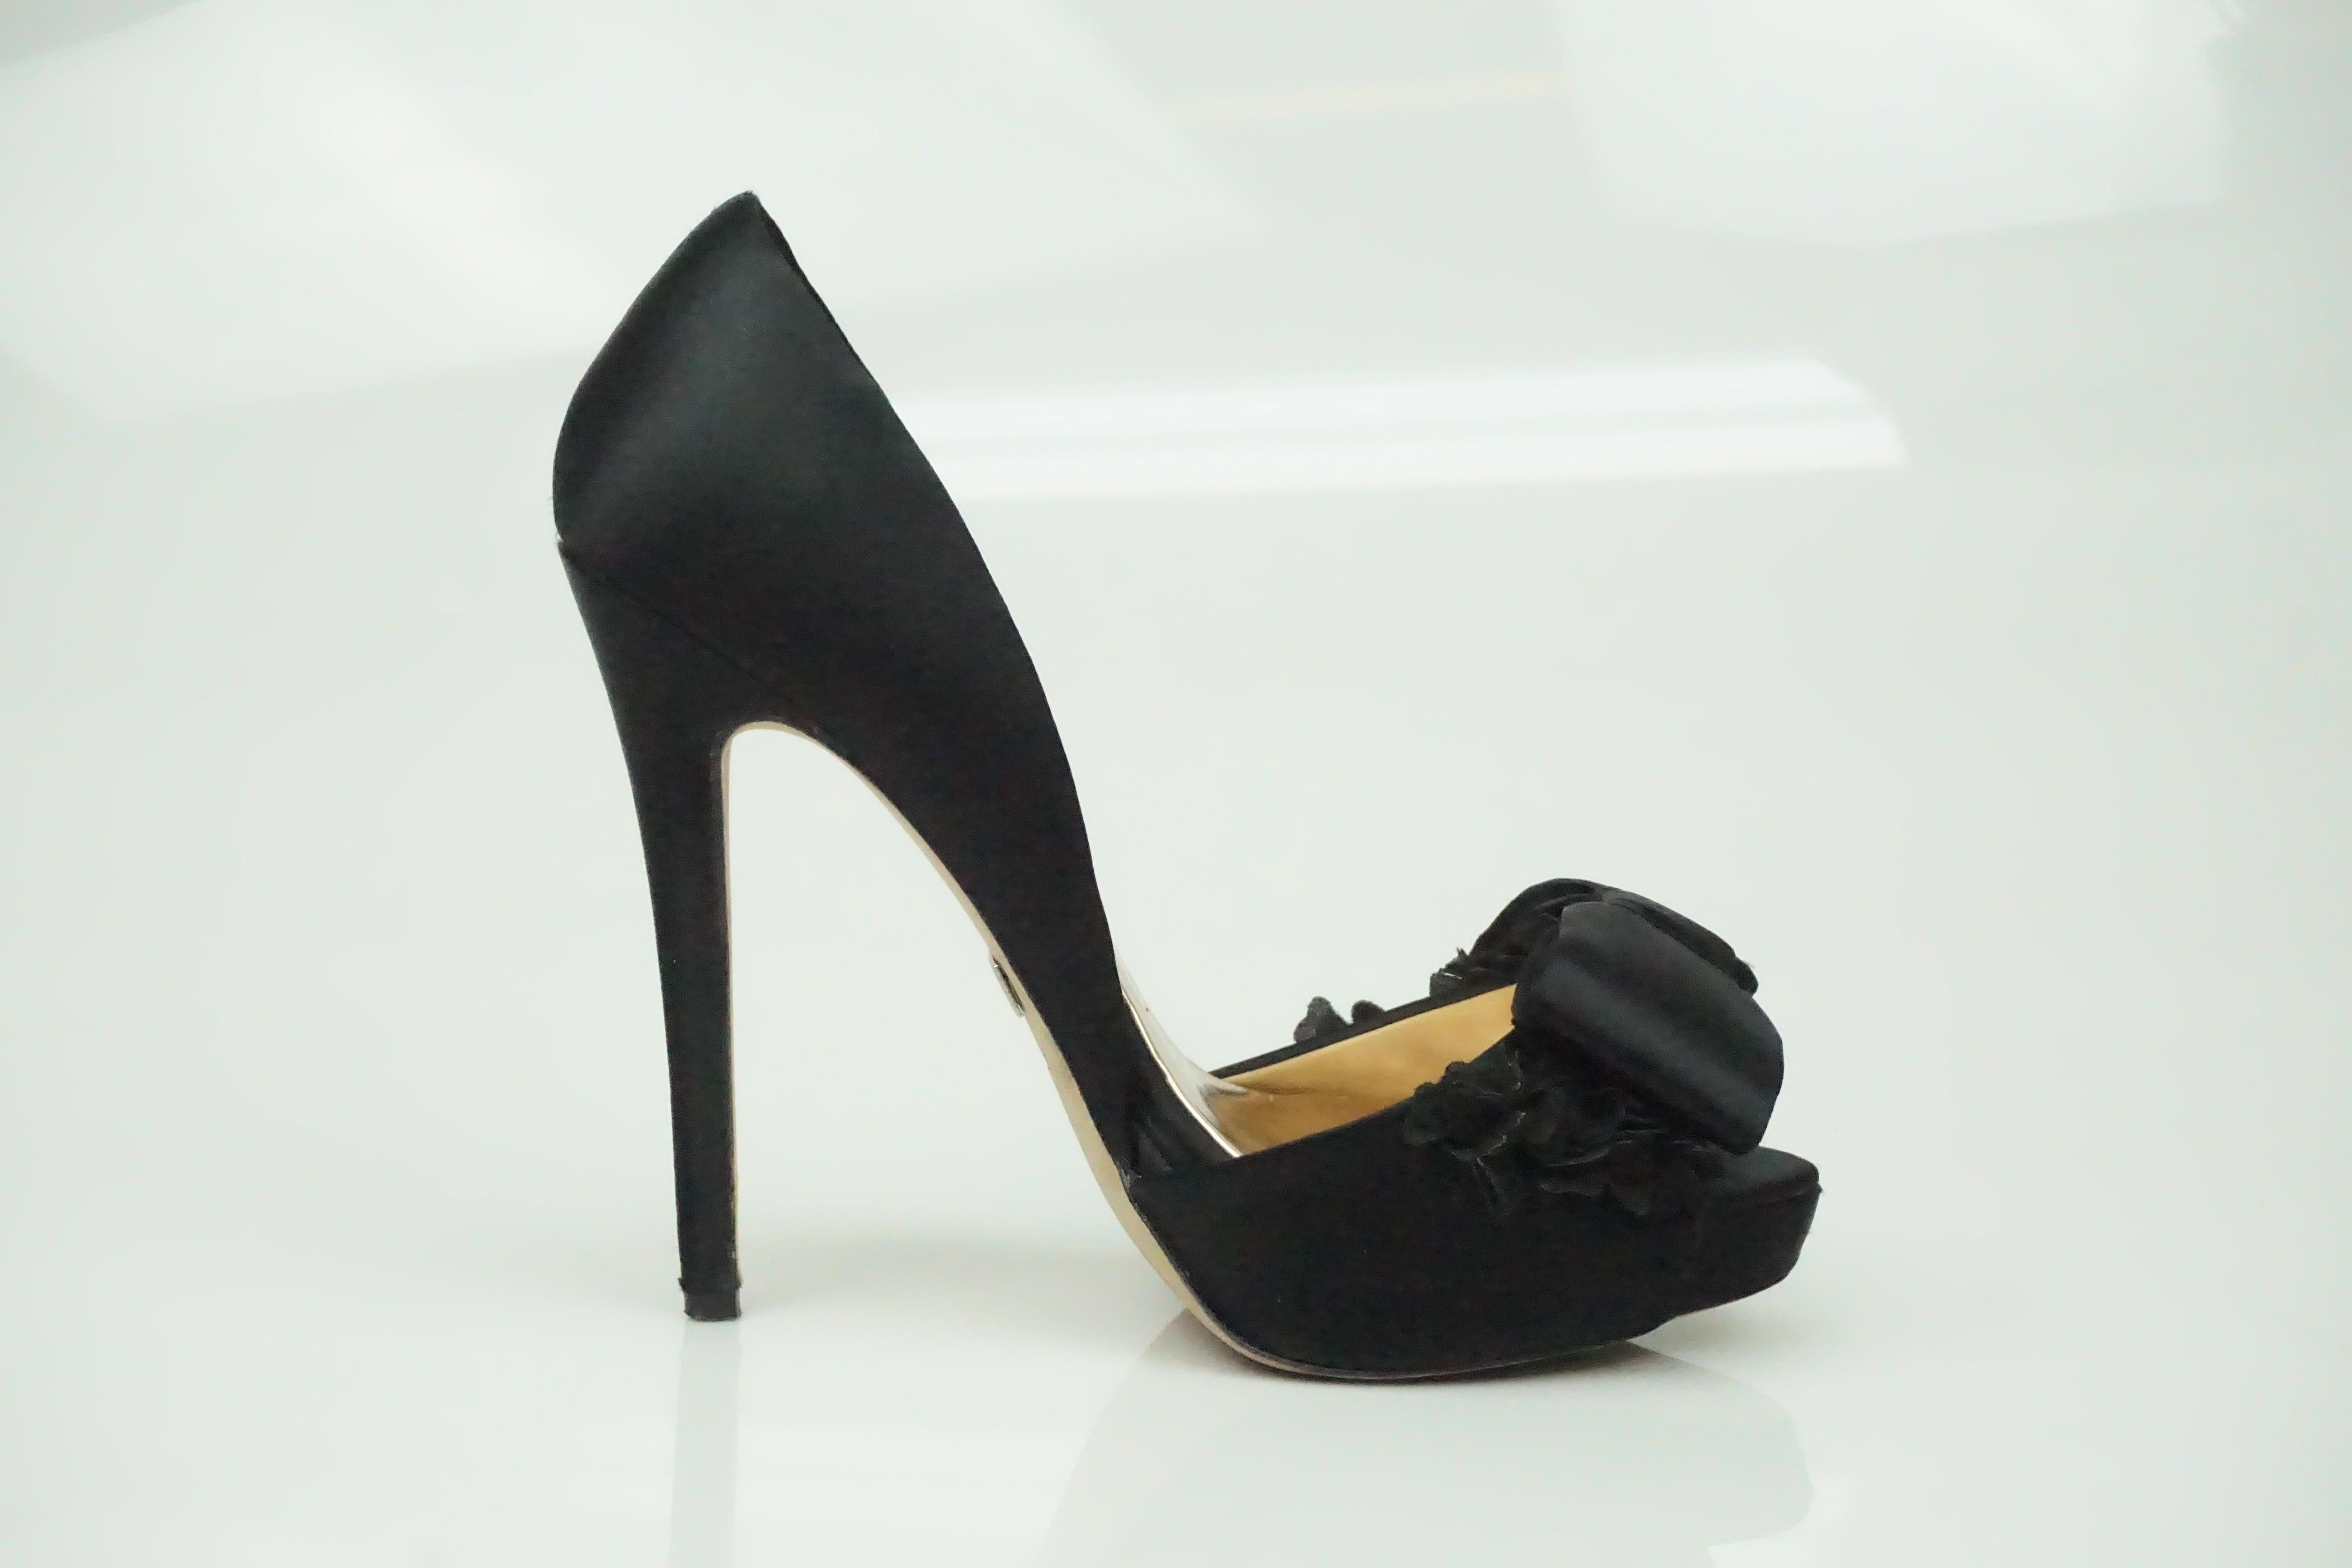 Badgley Mischka Black Satin Pump w/ Floral and Bow Detailing   These beautiful shoes are in good condition. They have a metallic looking inside and the shoes also have a peep toe. The top of the shoe has a beautiful floral detailing made out of silk